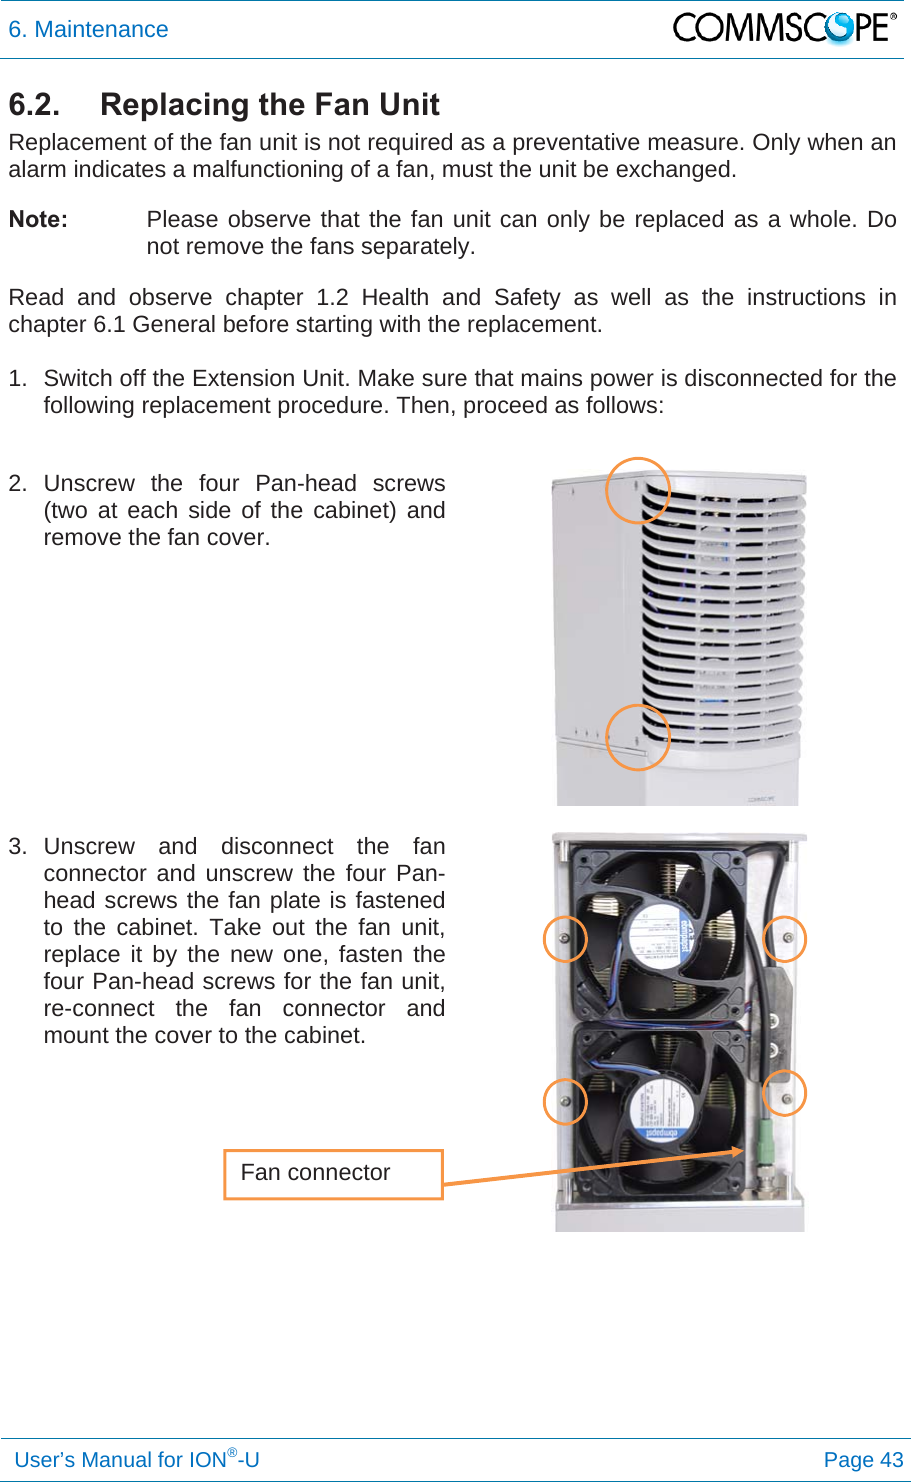 6. Maintenance   User’s Manual for ION®-U Page 43 6.2.  Replacing the Fan Unit Replacement of the fan unit is not required as a preventative measure. Only when an alarm indicates a malfunctioning of a fan, must the unit be exchanged. Note:  Please observe that the fan unit can only be replaced as a whole. Do not remove the fans separately. Read and observe chapter 1.2 Health and Safety as well as the instructions in chapter 6.1 General before starting with the replacement.   1.  Switch off the Extension Unit. Make sure that mains power is disconnected for the following replacement procedure. Then, proceed as follows:  2. Unscrew the four Pan-head screws (two at each side of the cabinet) and remove the fan cover.     3. Unscrew and disconnect the fan connector and unscrew the four Pan-head screws the fan plate is fastened to the cabinet. Take out the fan unit, replace it by the new one, fasten the four Pan-head screws for the fan unit, re-connect the fan connector and mount the cover to the cabinet.      Fan connector 